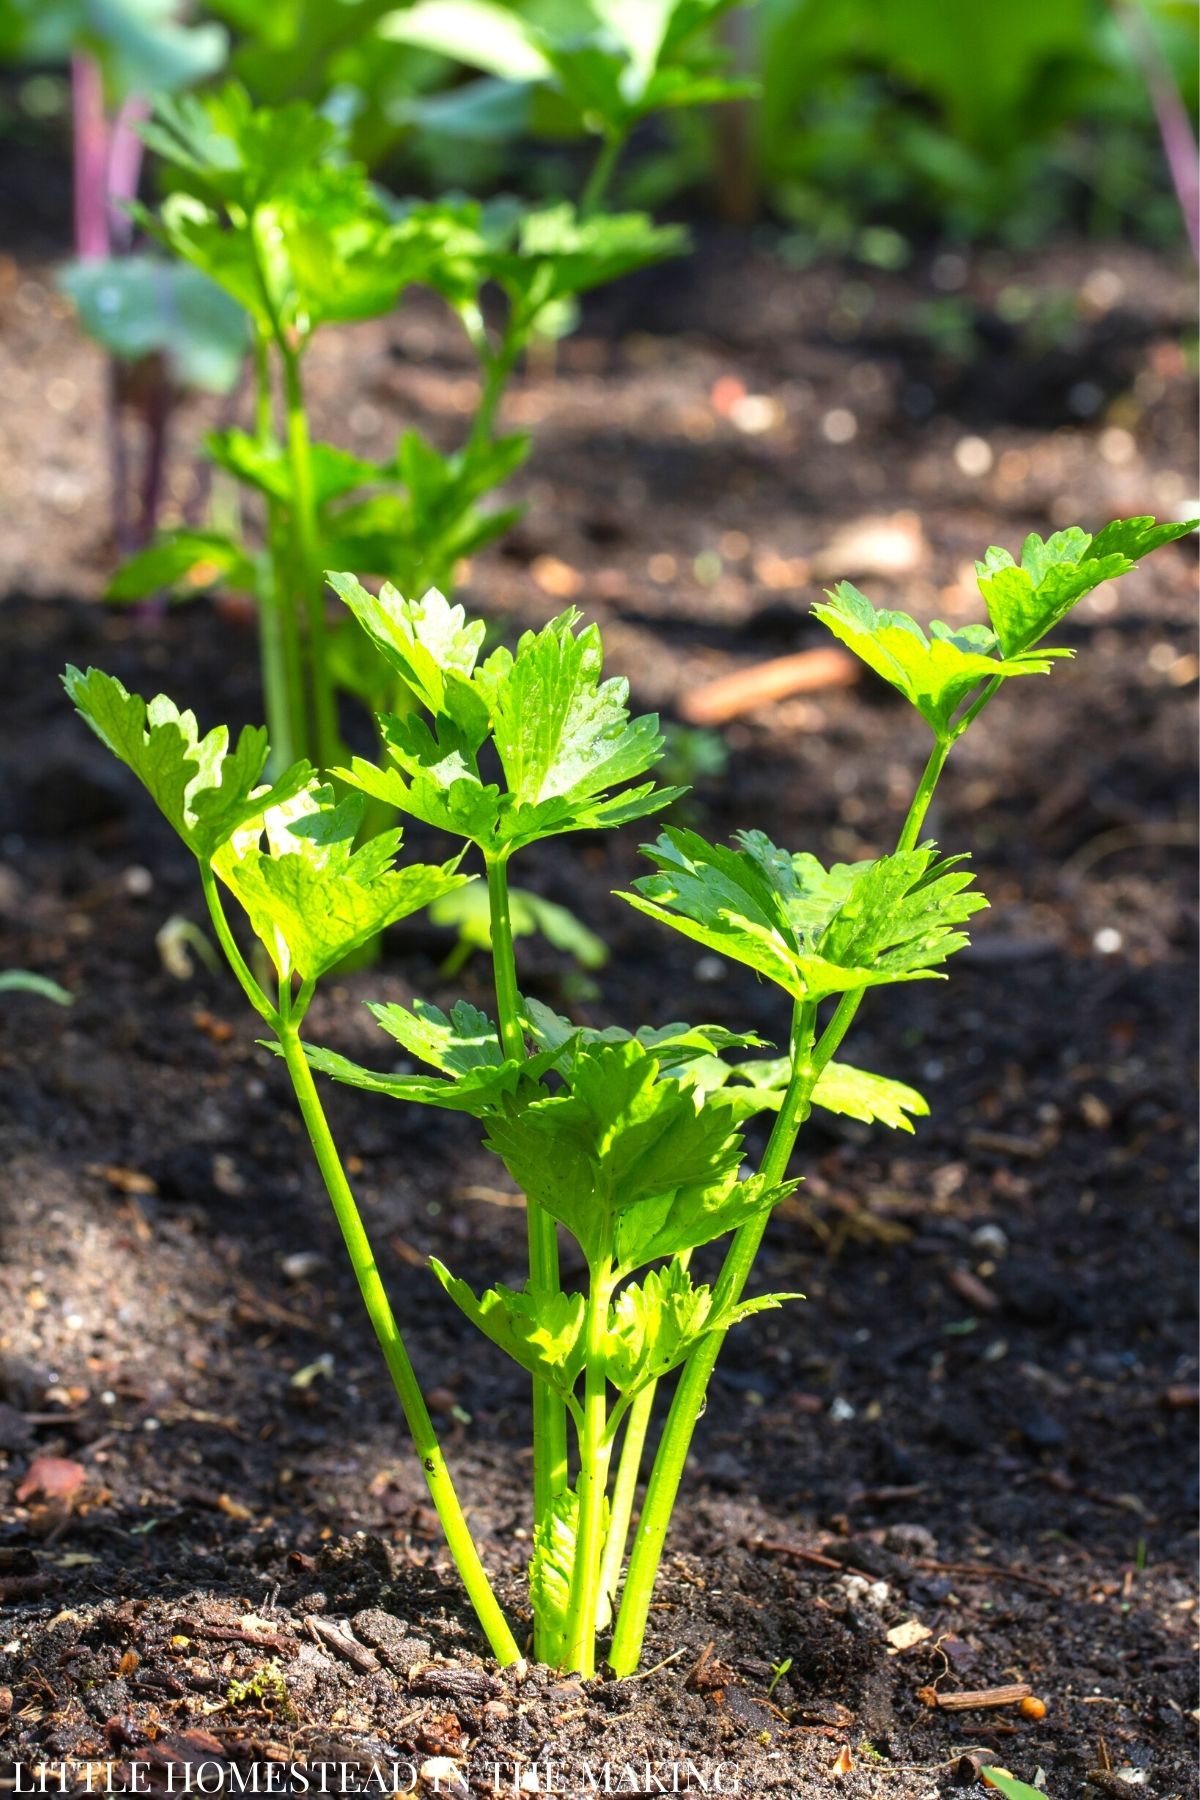 Several celery plants growing up from the soil.